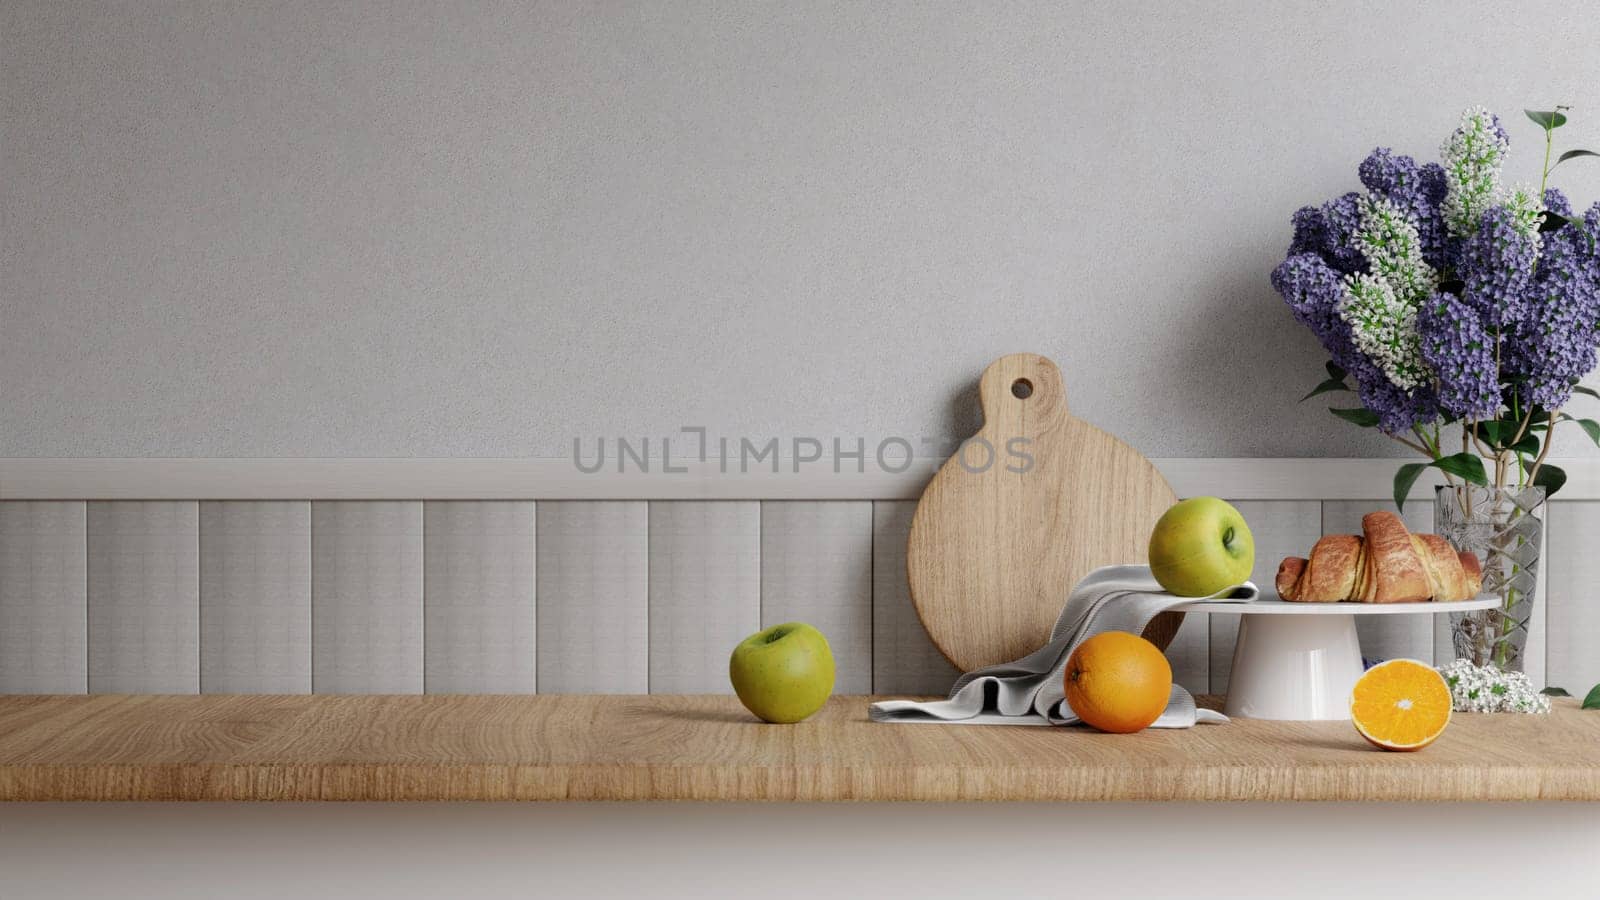 Blank empty space on beautiful wood. wooden counter top with croissant, fruit, flower Backdrop. 3d render illustration.